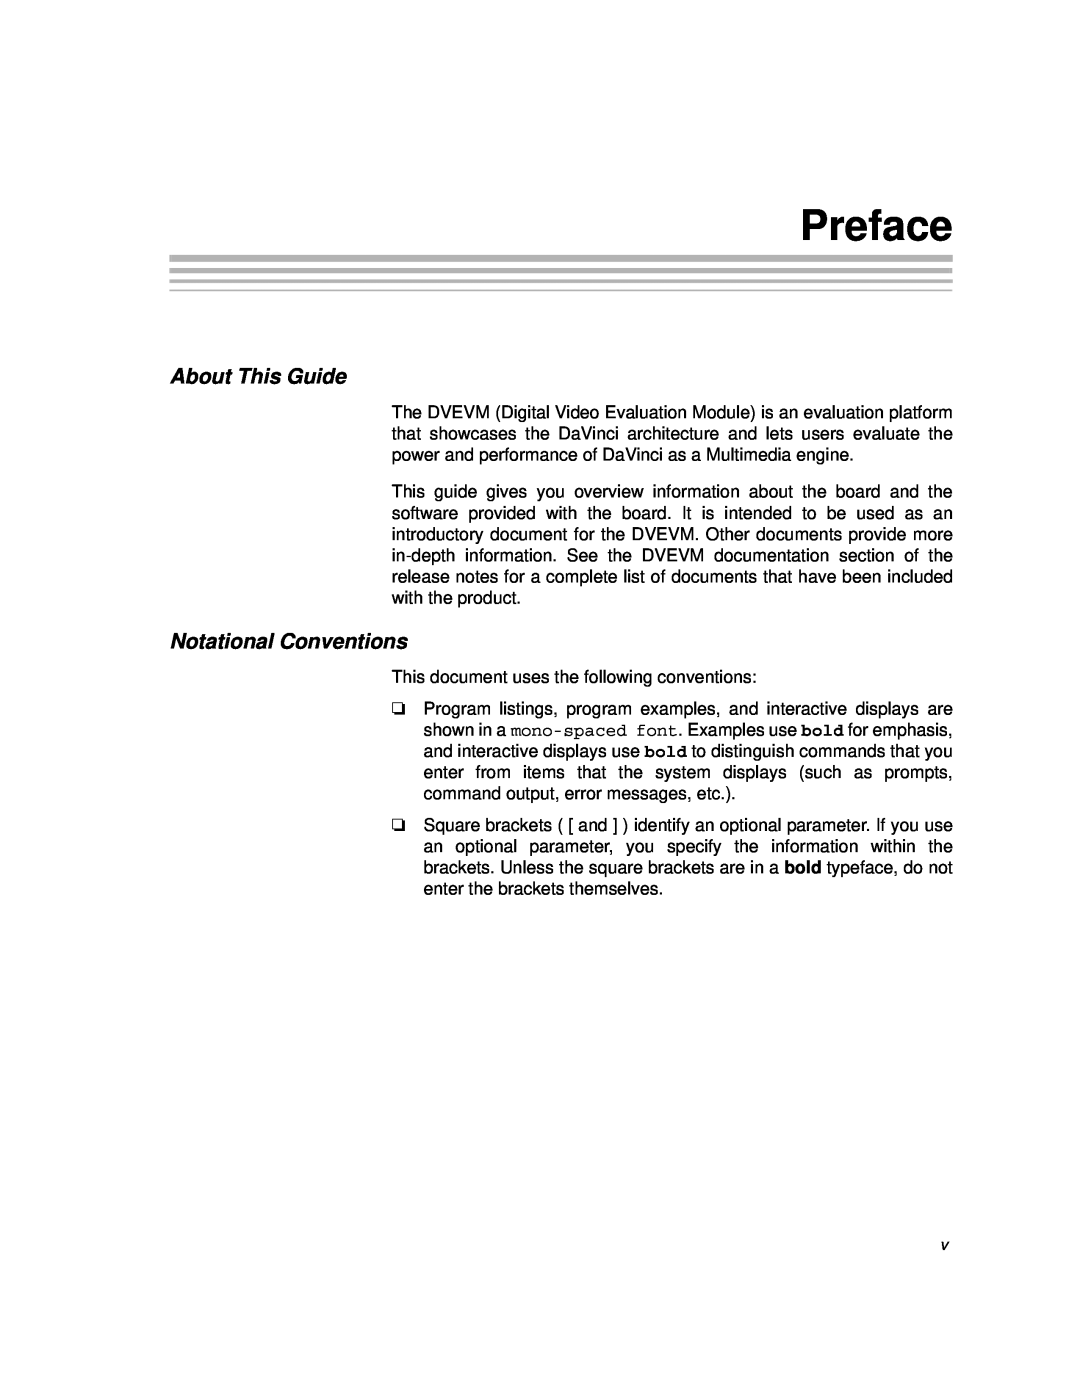 Texas Instruments TMS320DM357 DVEVM v2.05 manual Preface, About This Guide, Notational Conventions 